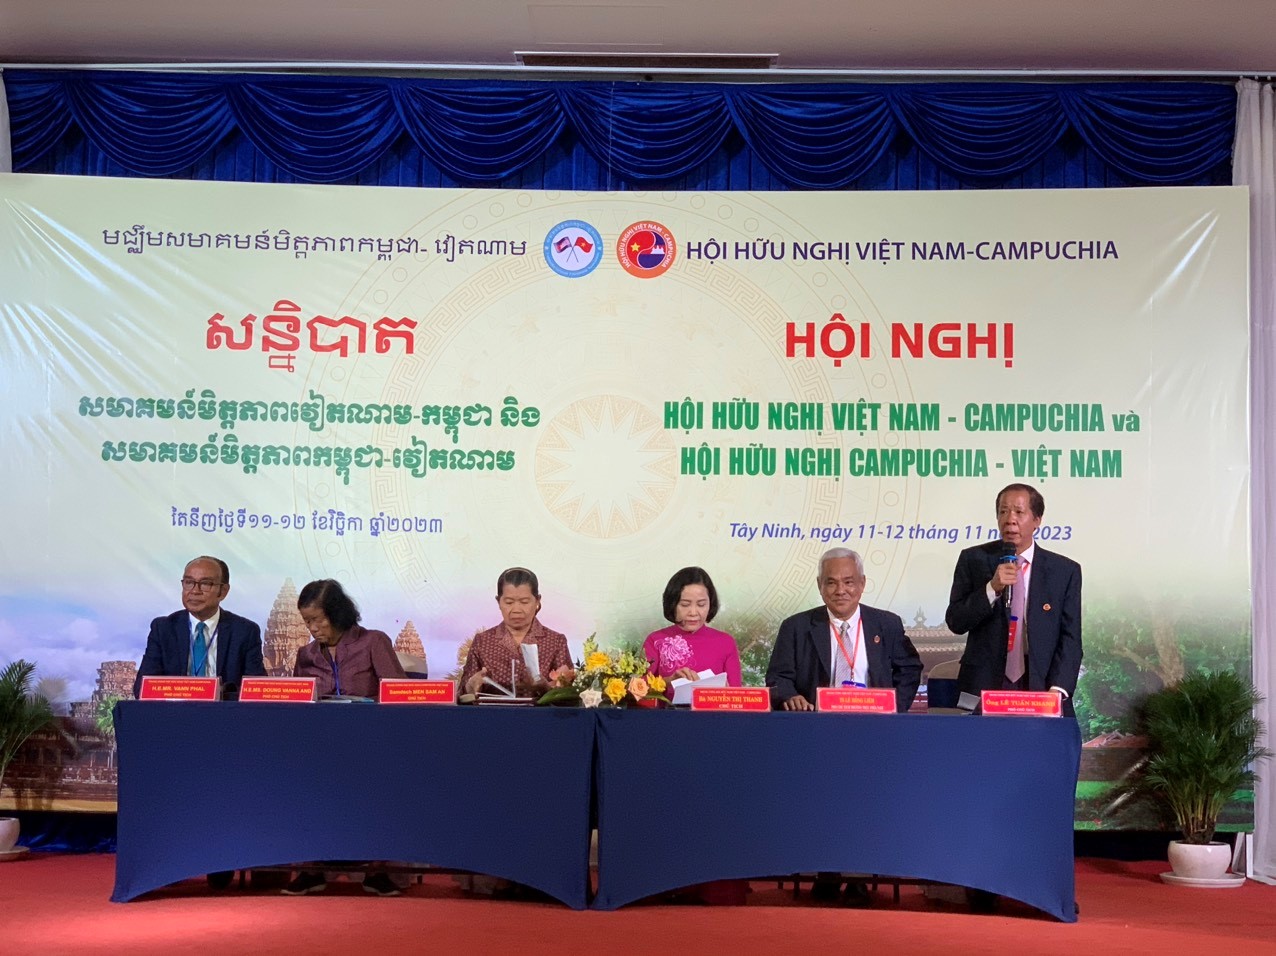 The objective of the Cambodia-Central Vietnam Friendship Association's joint conference was to assess and summarise the outcomes of the first year of implementing the 